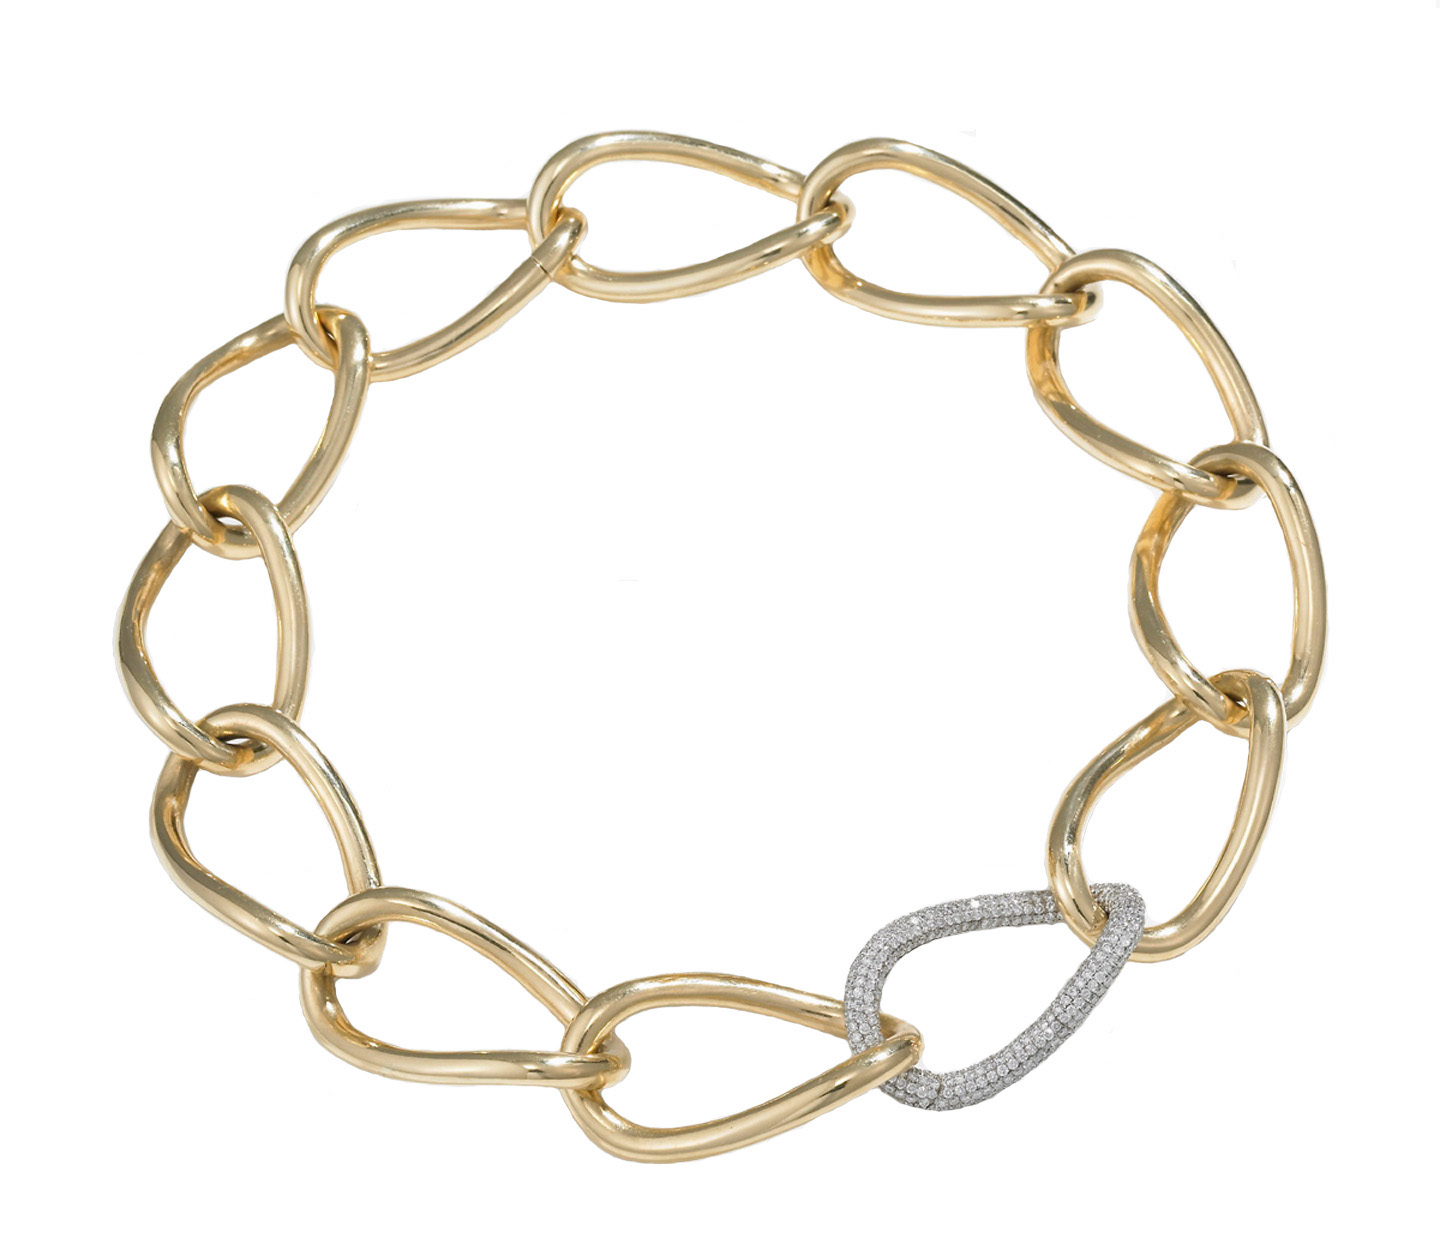  A pair of the 18KT yellow gold "Posh"&nbsp; bracelets &nbsp;from the Meriwether Retro-Redux line can be joined to form the “Posh" necklace. The interchangeable diamond pavé clasp link shown can be purchased separately. From the&nbsp; RETRO REDUX &nb